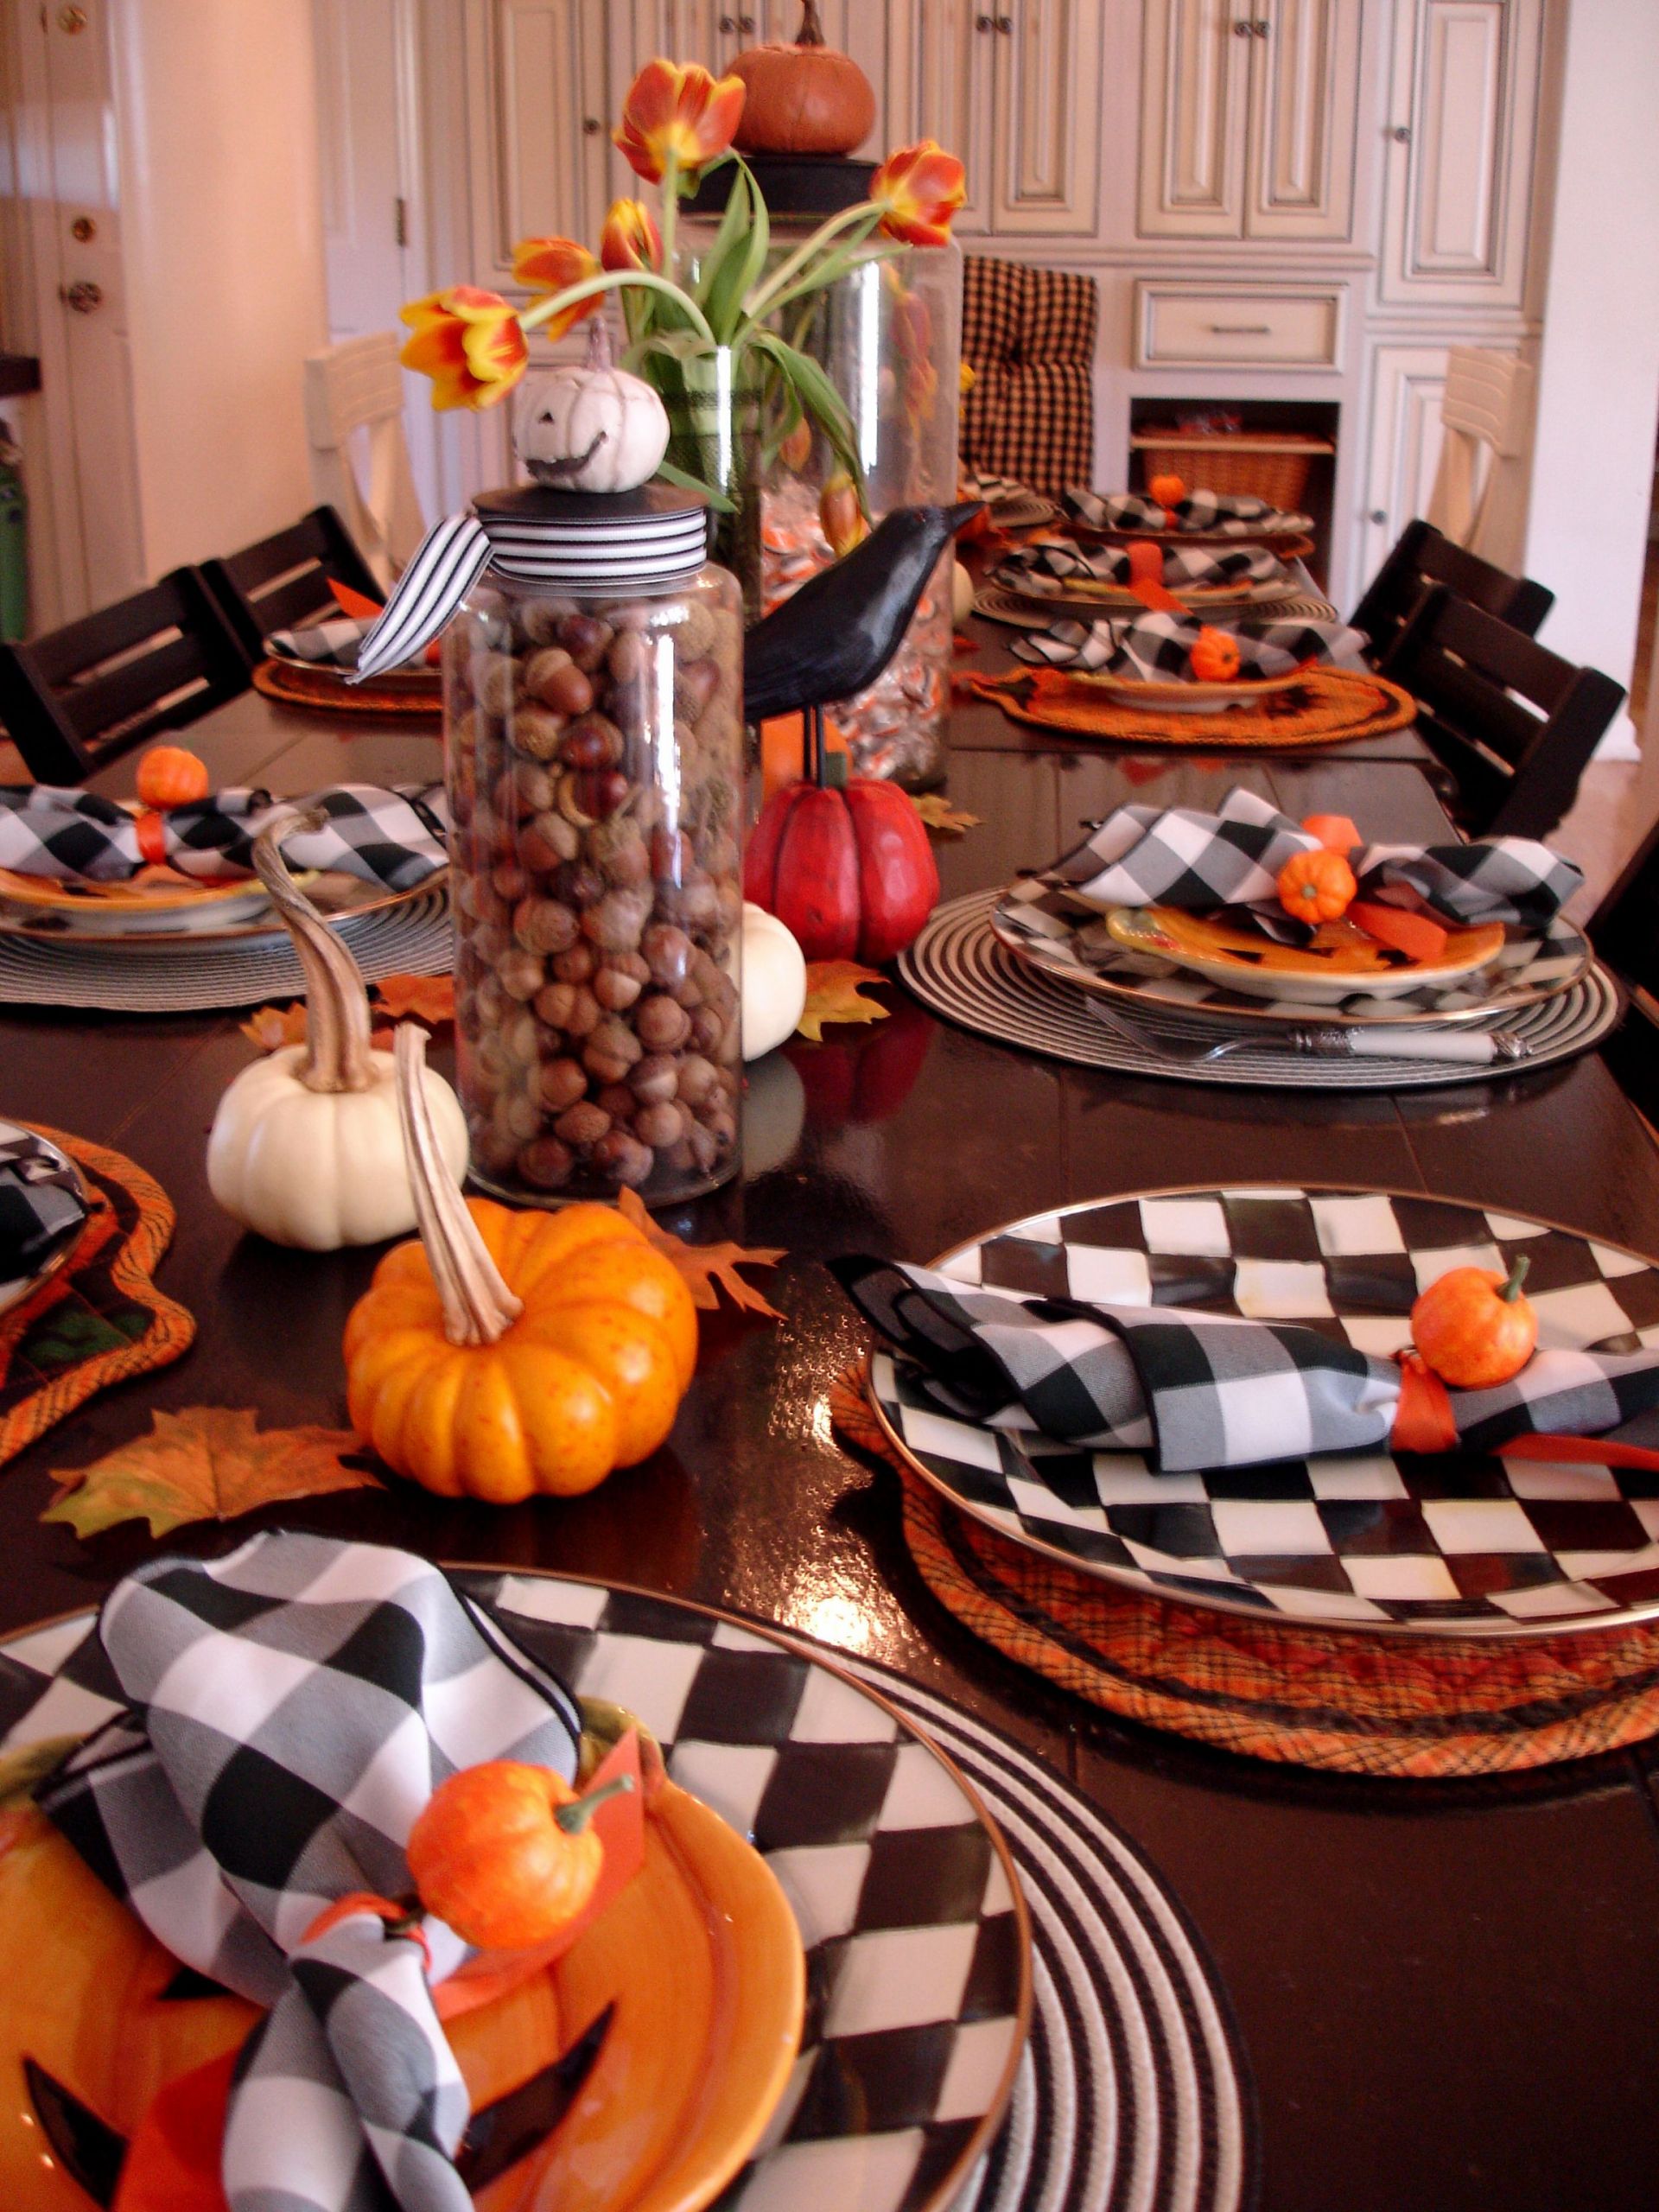 Table Decorating Ideas For Halloween Party
 14 Easy DIY Halloween Projects & Crafts Ideas – Homemade